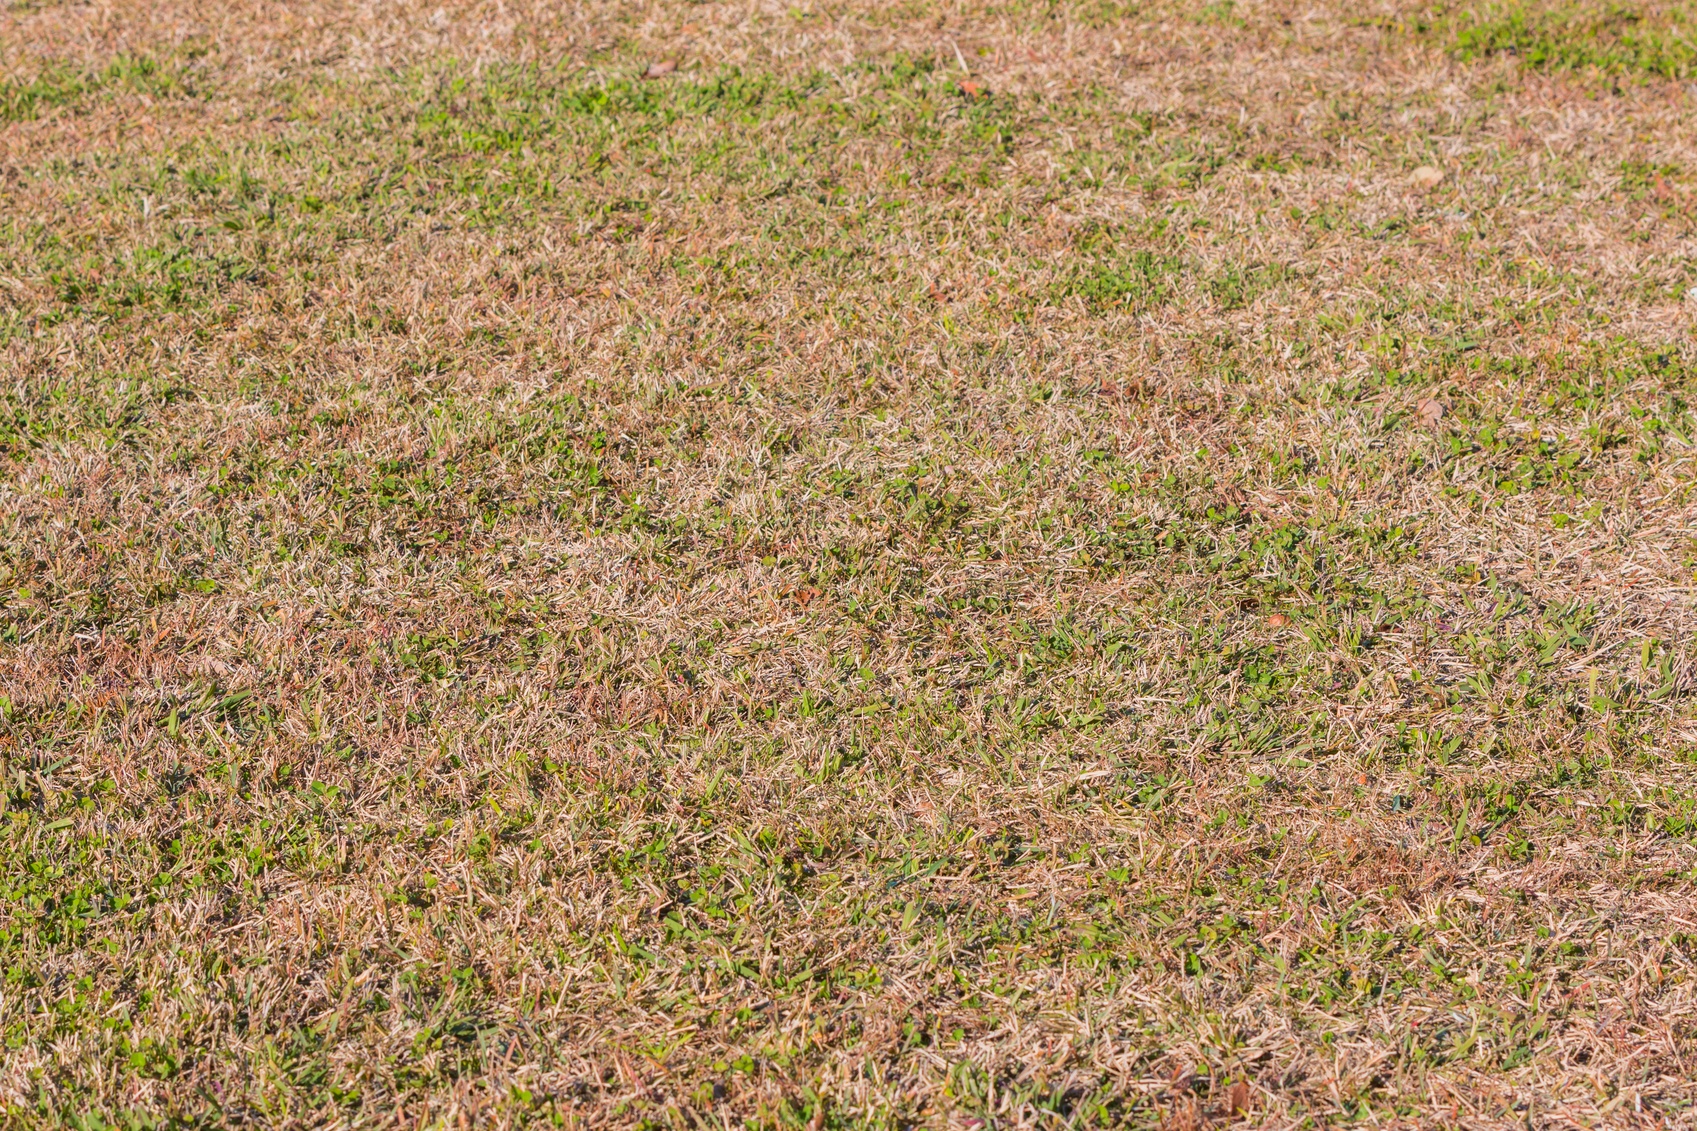 Learn More About Your Dormant Lawn